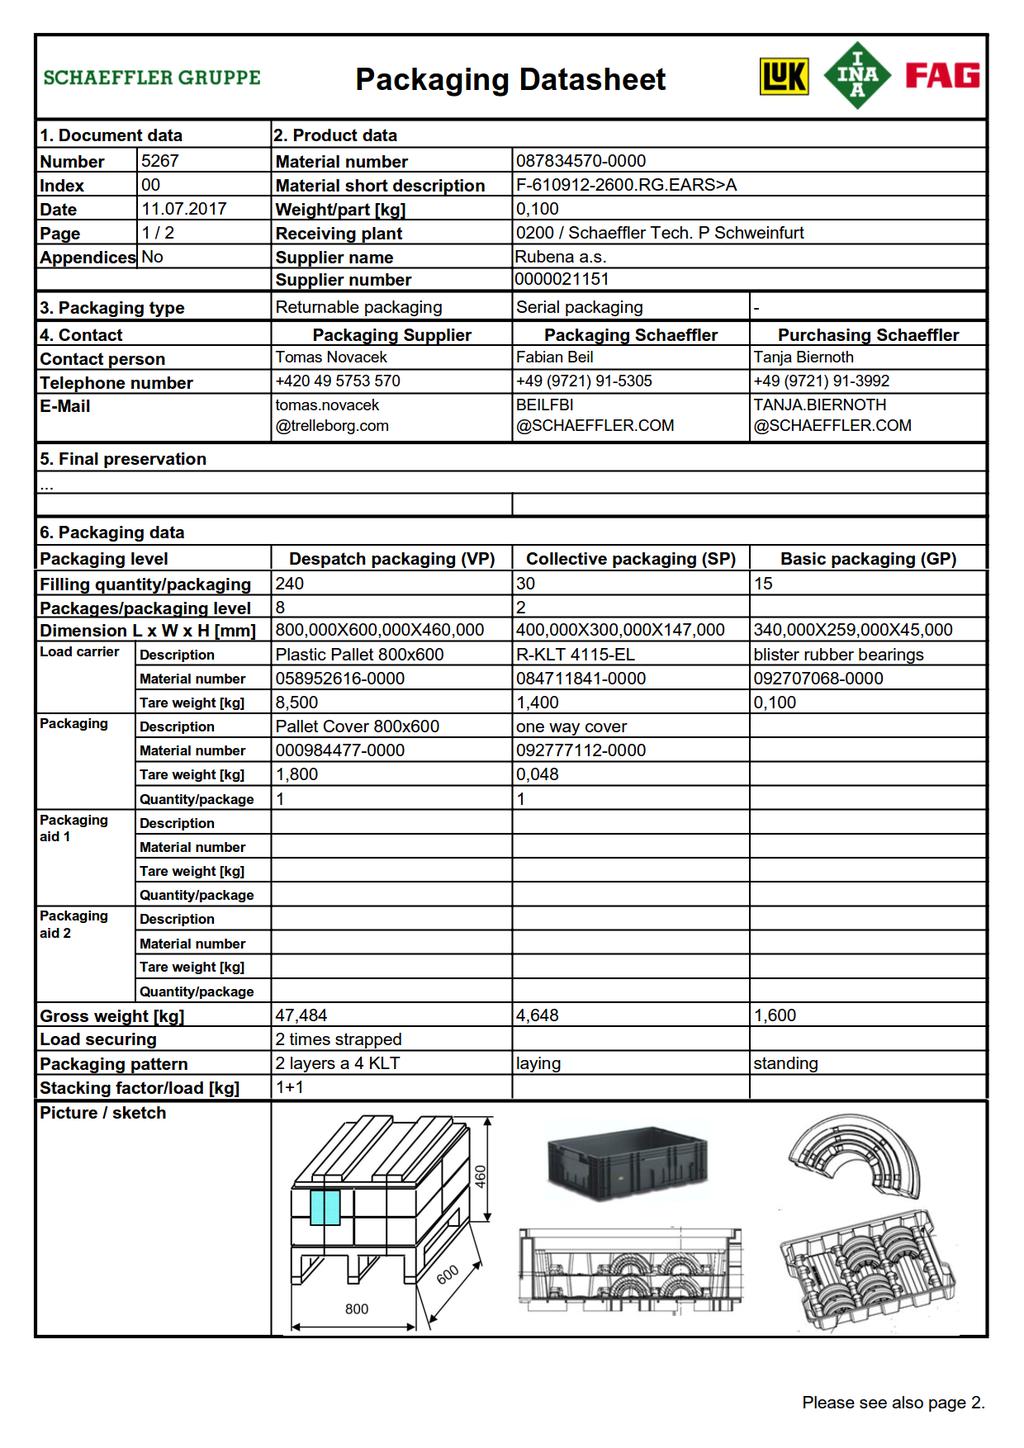 Appendix D2: Packaging Data Sheet Version 2 (two pages) Sample: